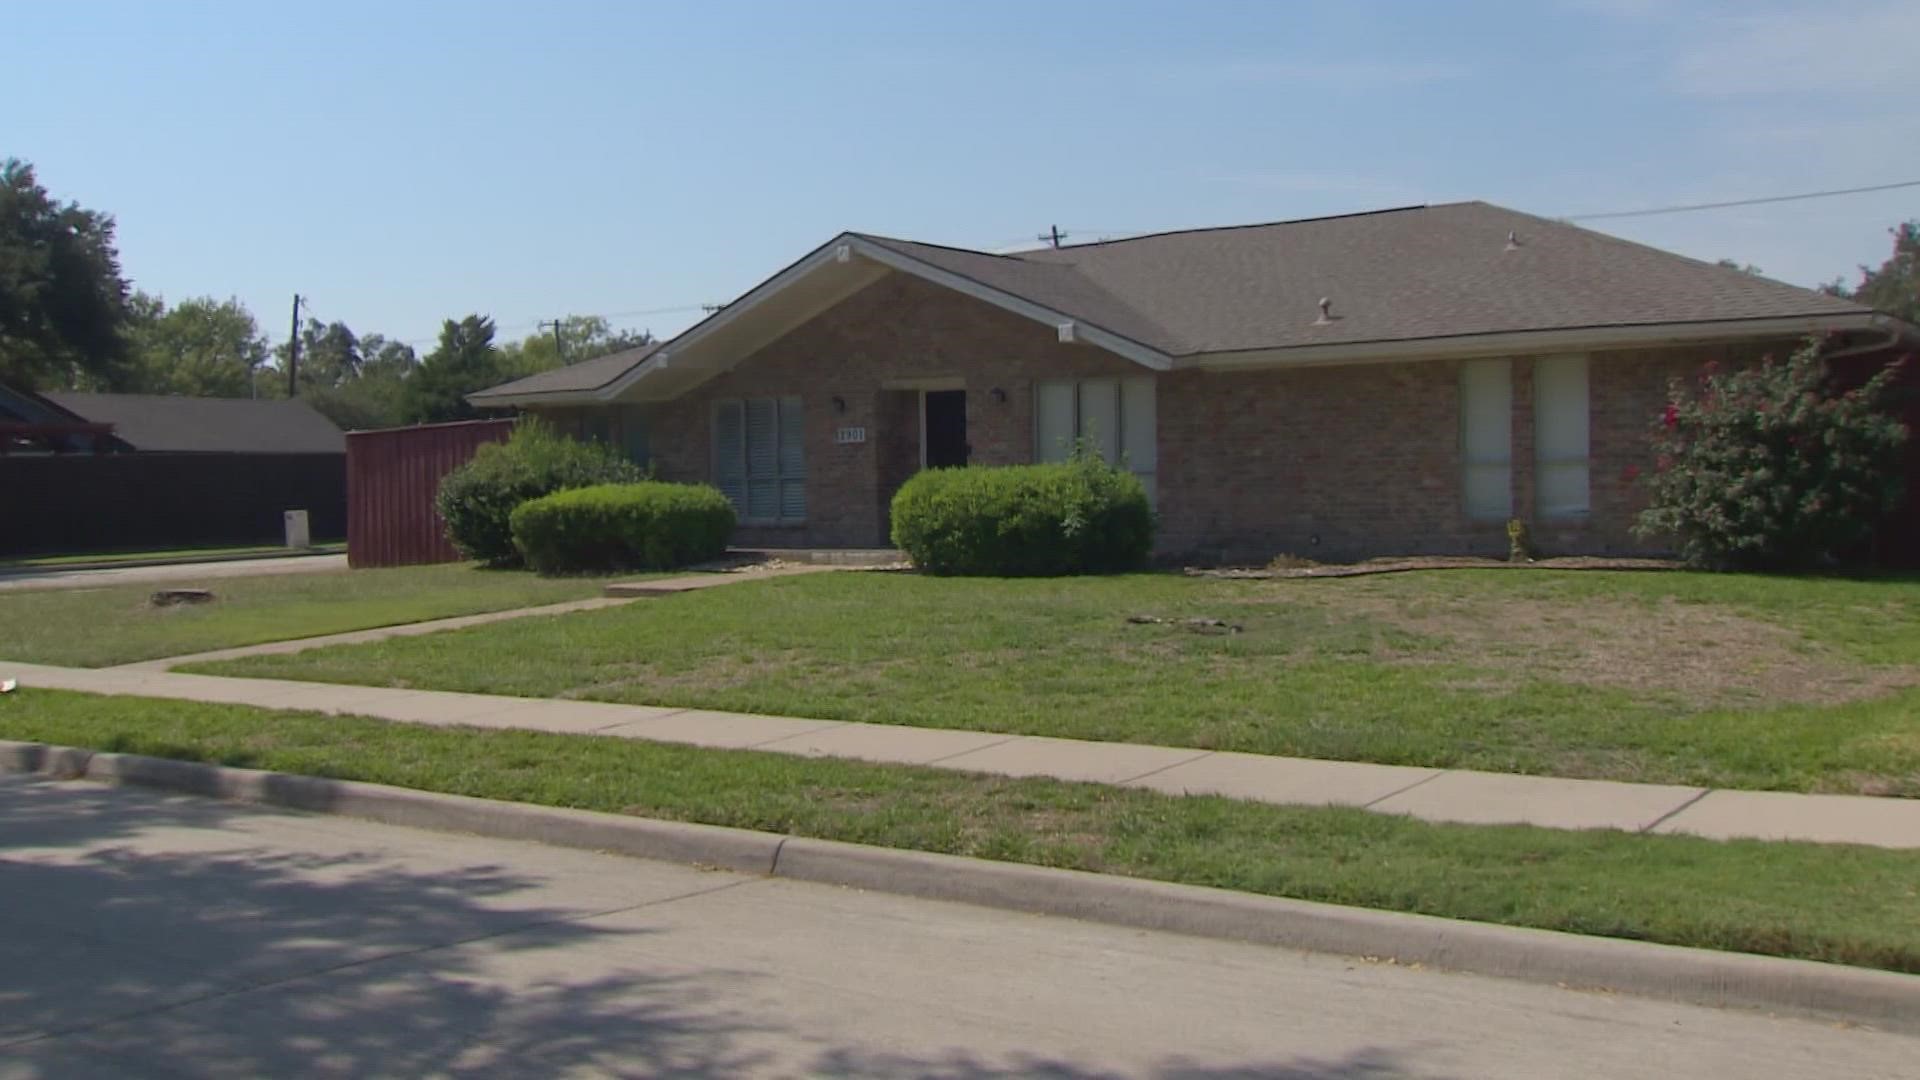 Authorities said homeless teens were forced into a sex trafficking ring at a house on La Palma Lane in Plano